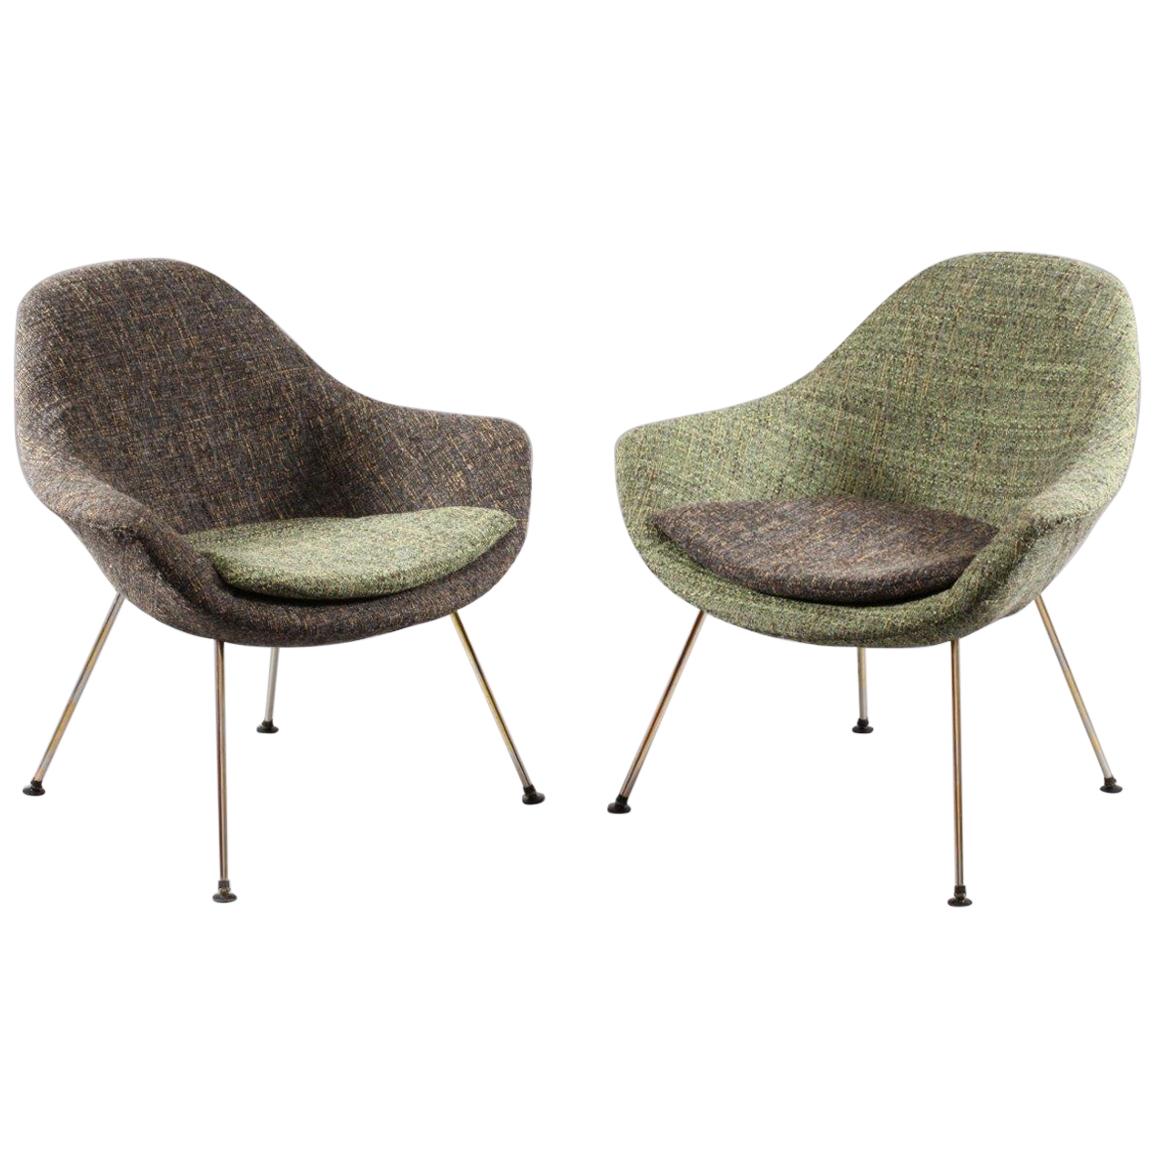 Pair of Cocktail Shell Chairs, Italy, 1950 For Sale